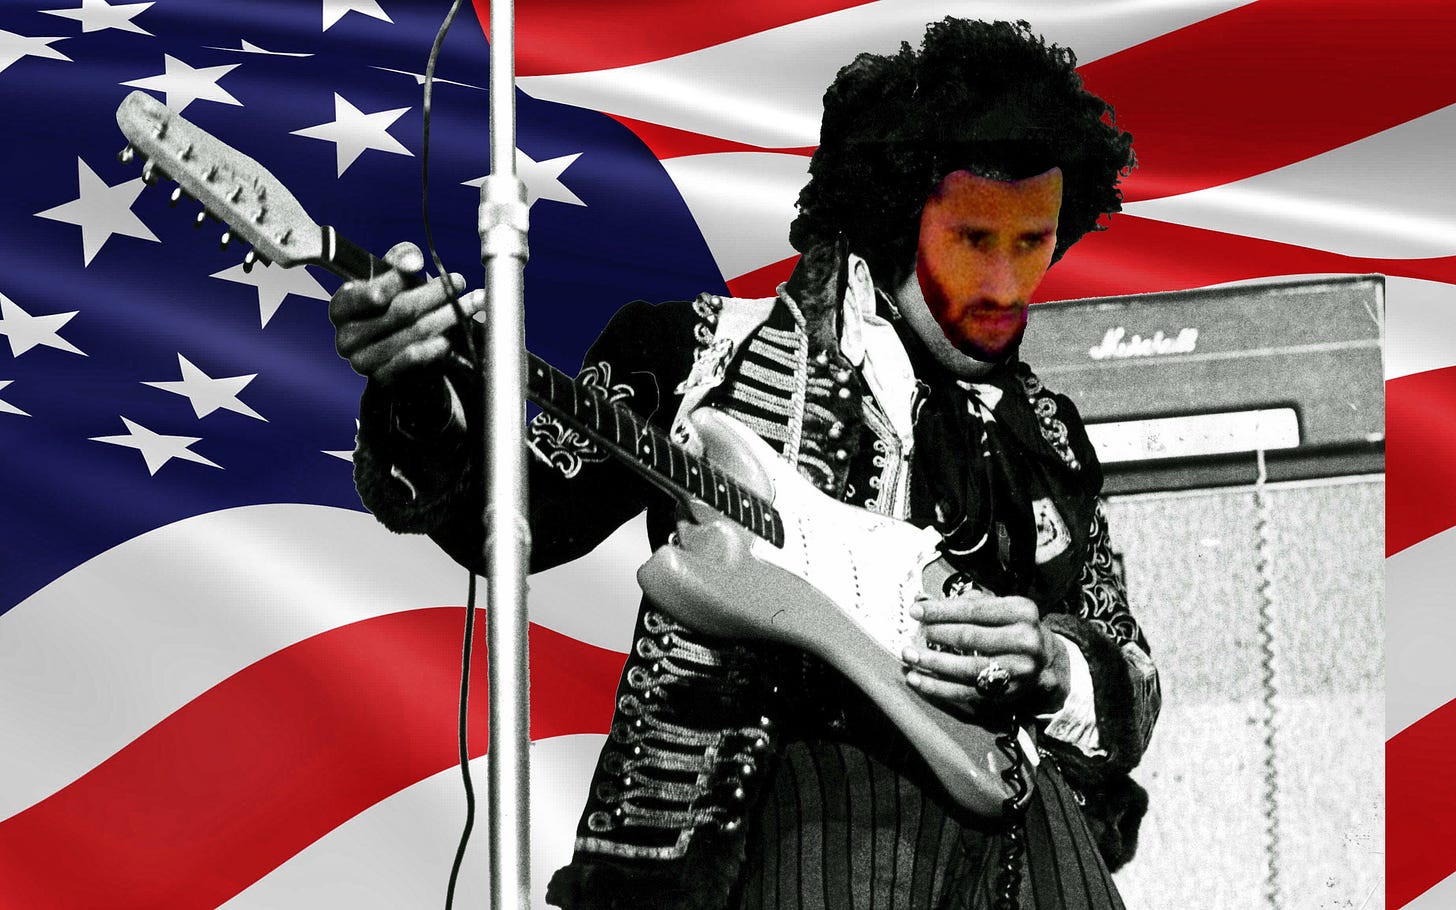 Hendrix wearing his Kaepernick mask while playing guitar in front of a giant United States flag.